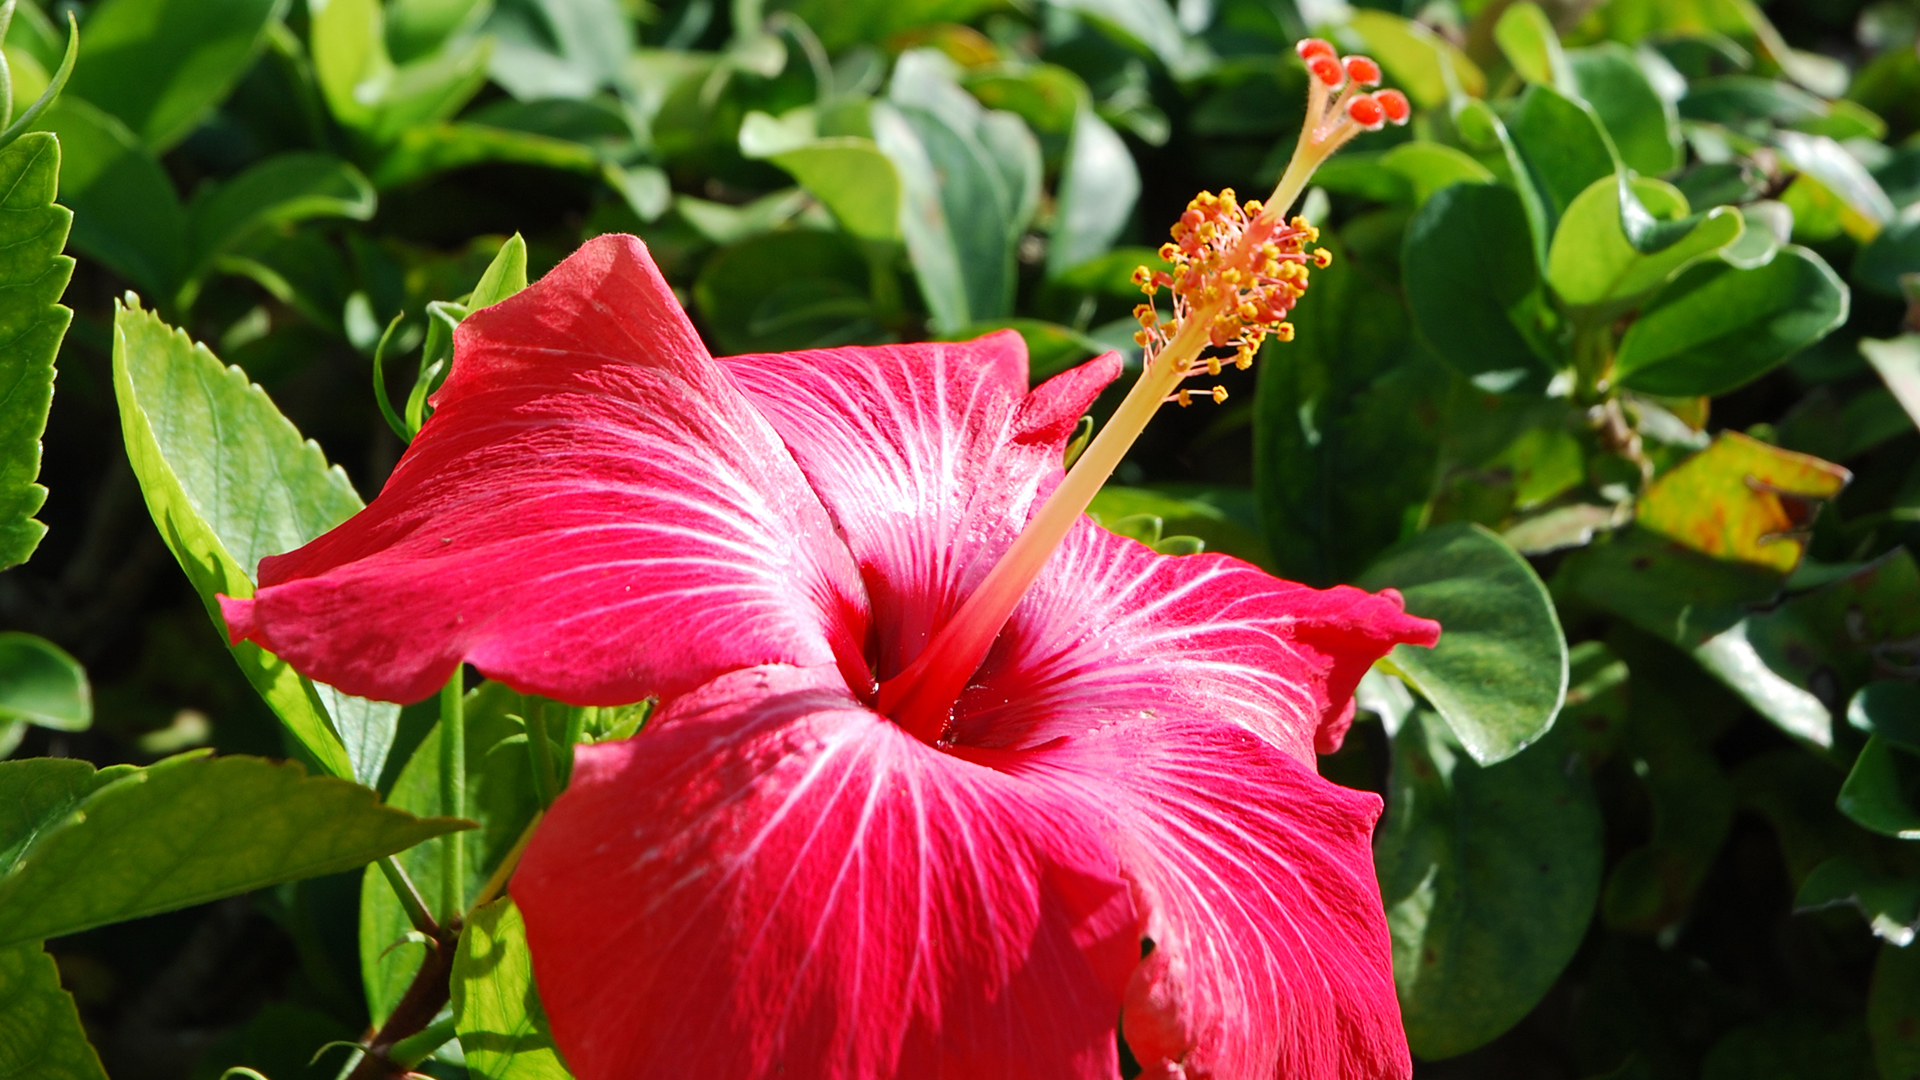 How many colors of hibiscus are there?